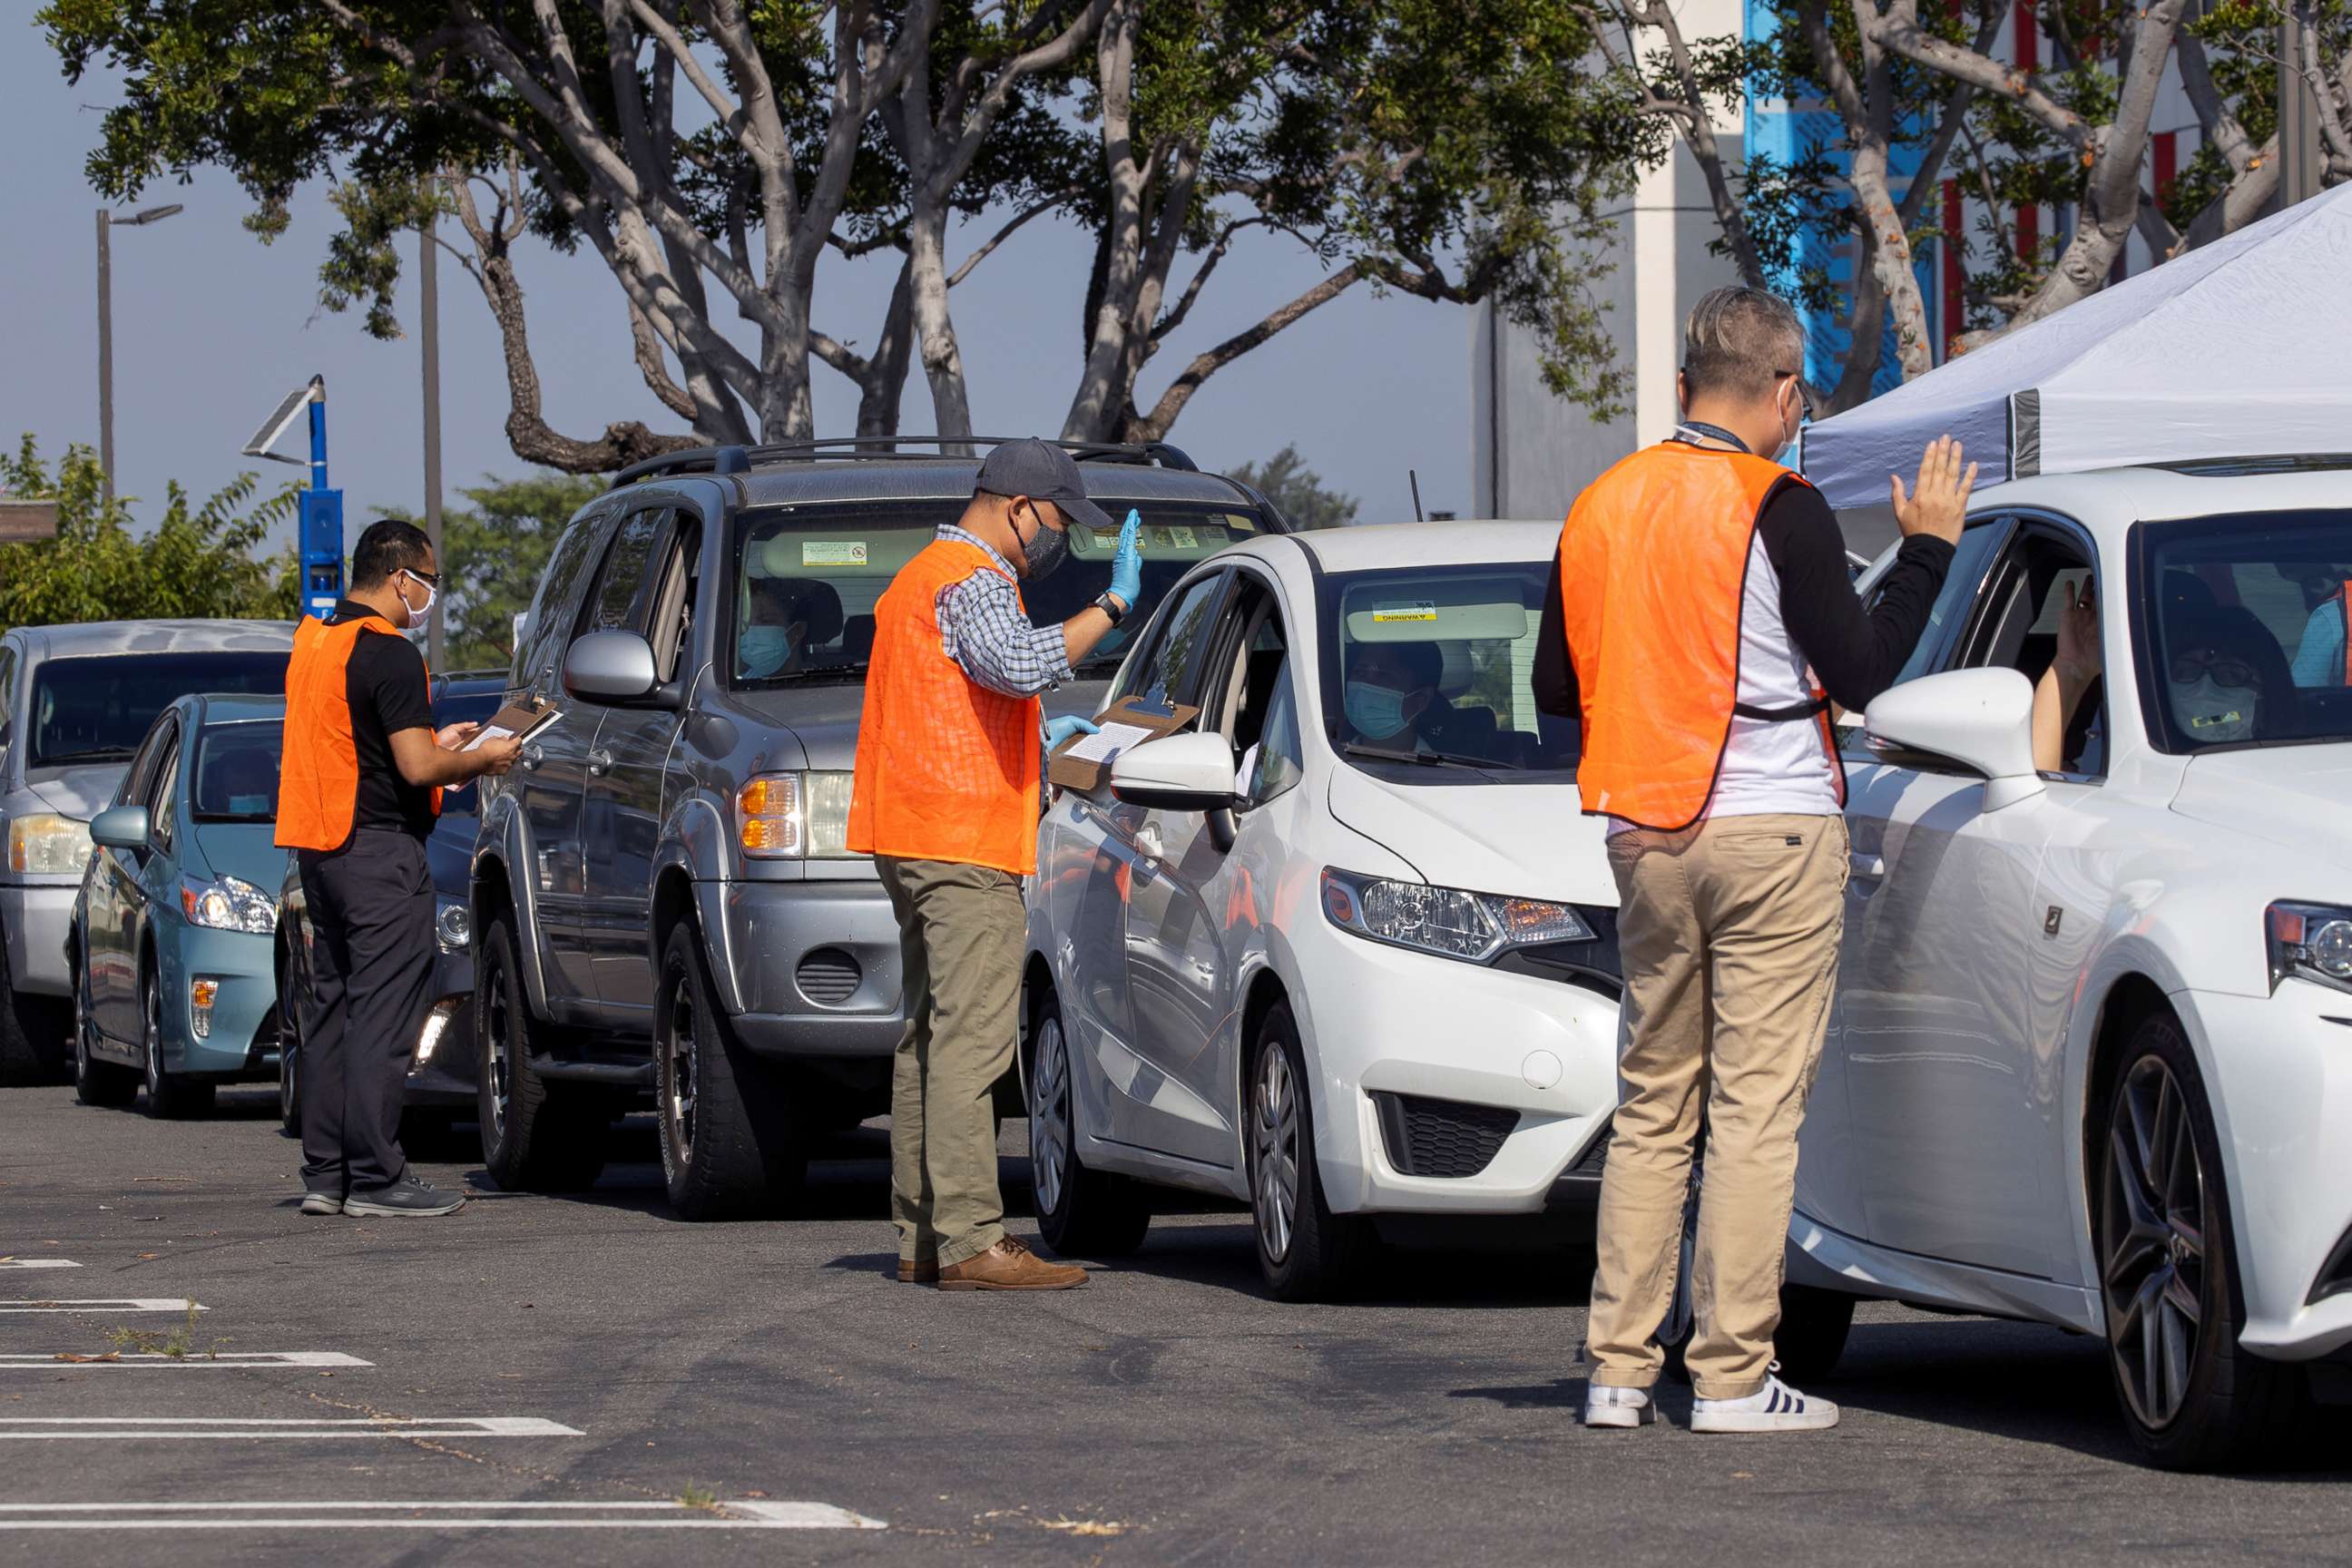 PHOTO: U.S. immigration officers administer the oath as a swearing-in of newly naturalized United States citizens takes place in an empty parking lot in Santa Ana, Calif., July 29, 2020.